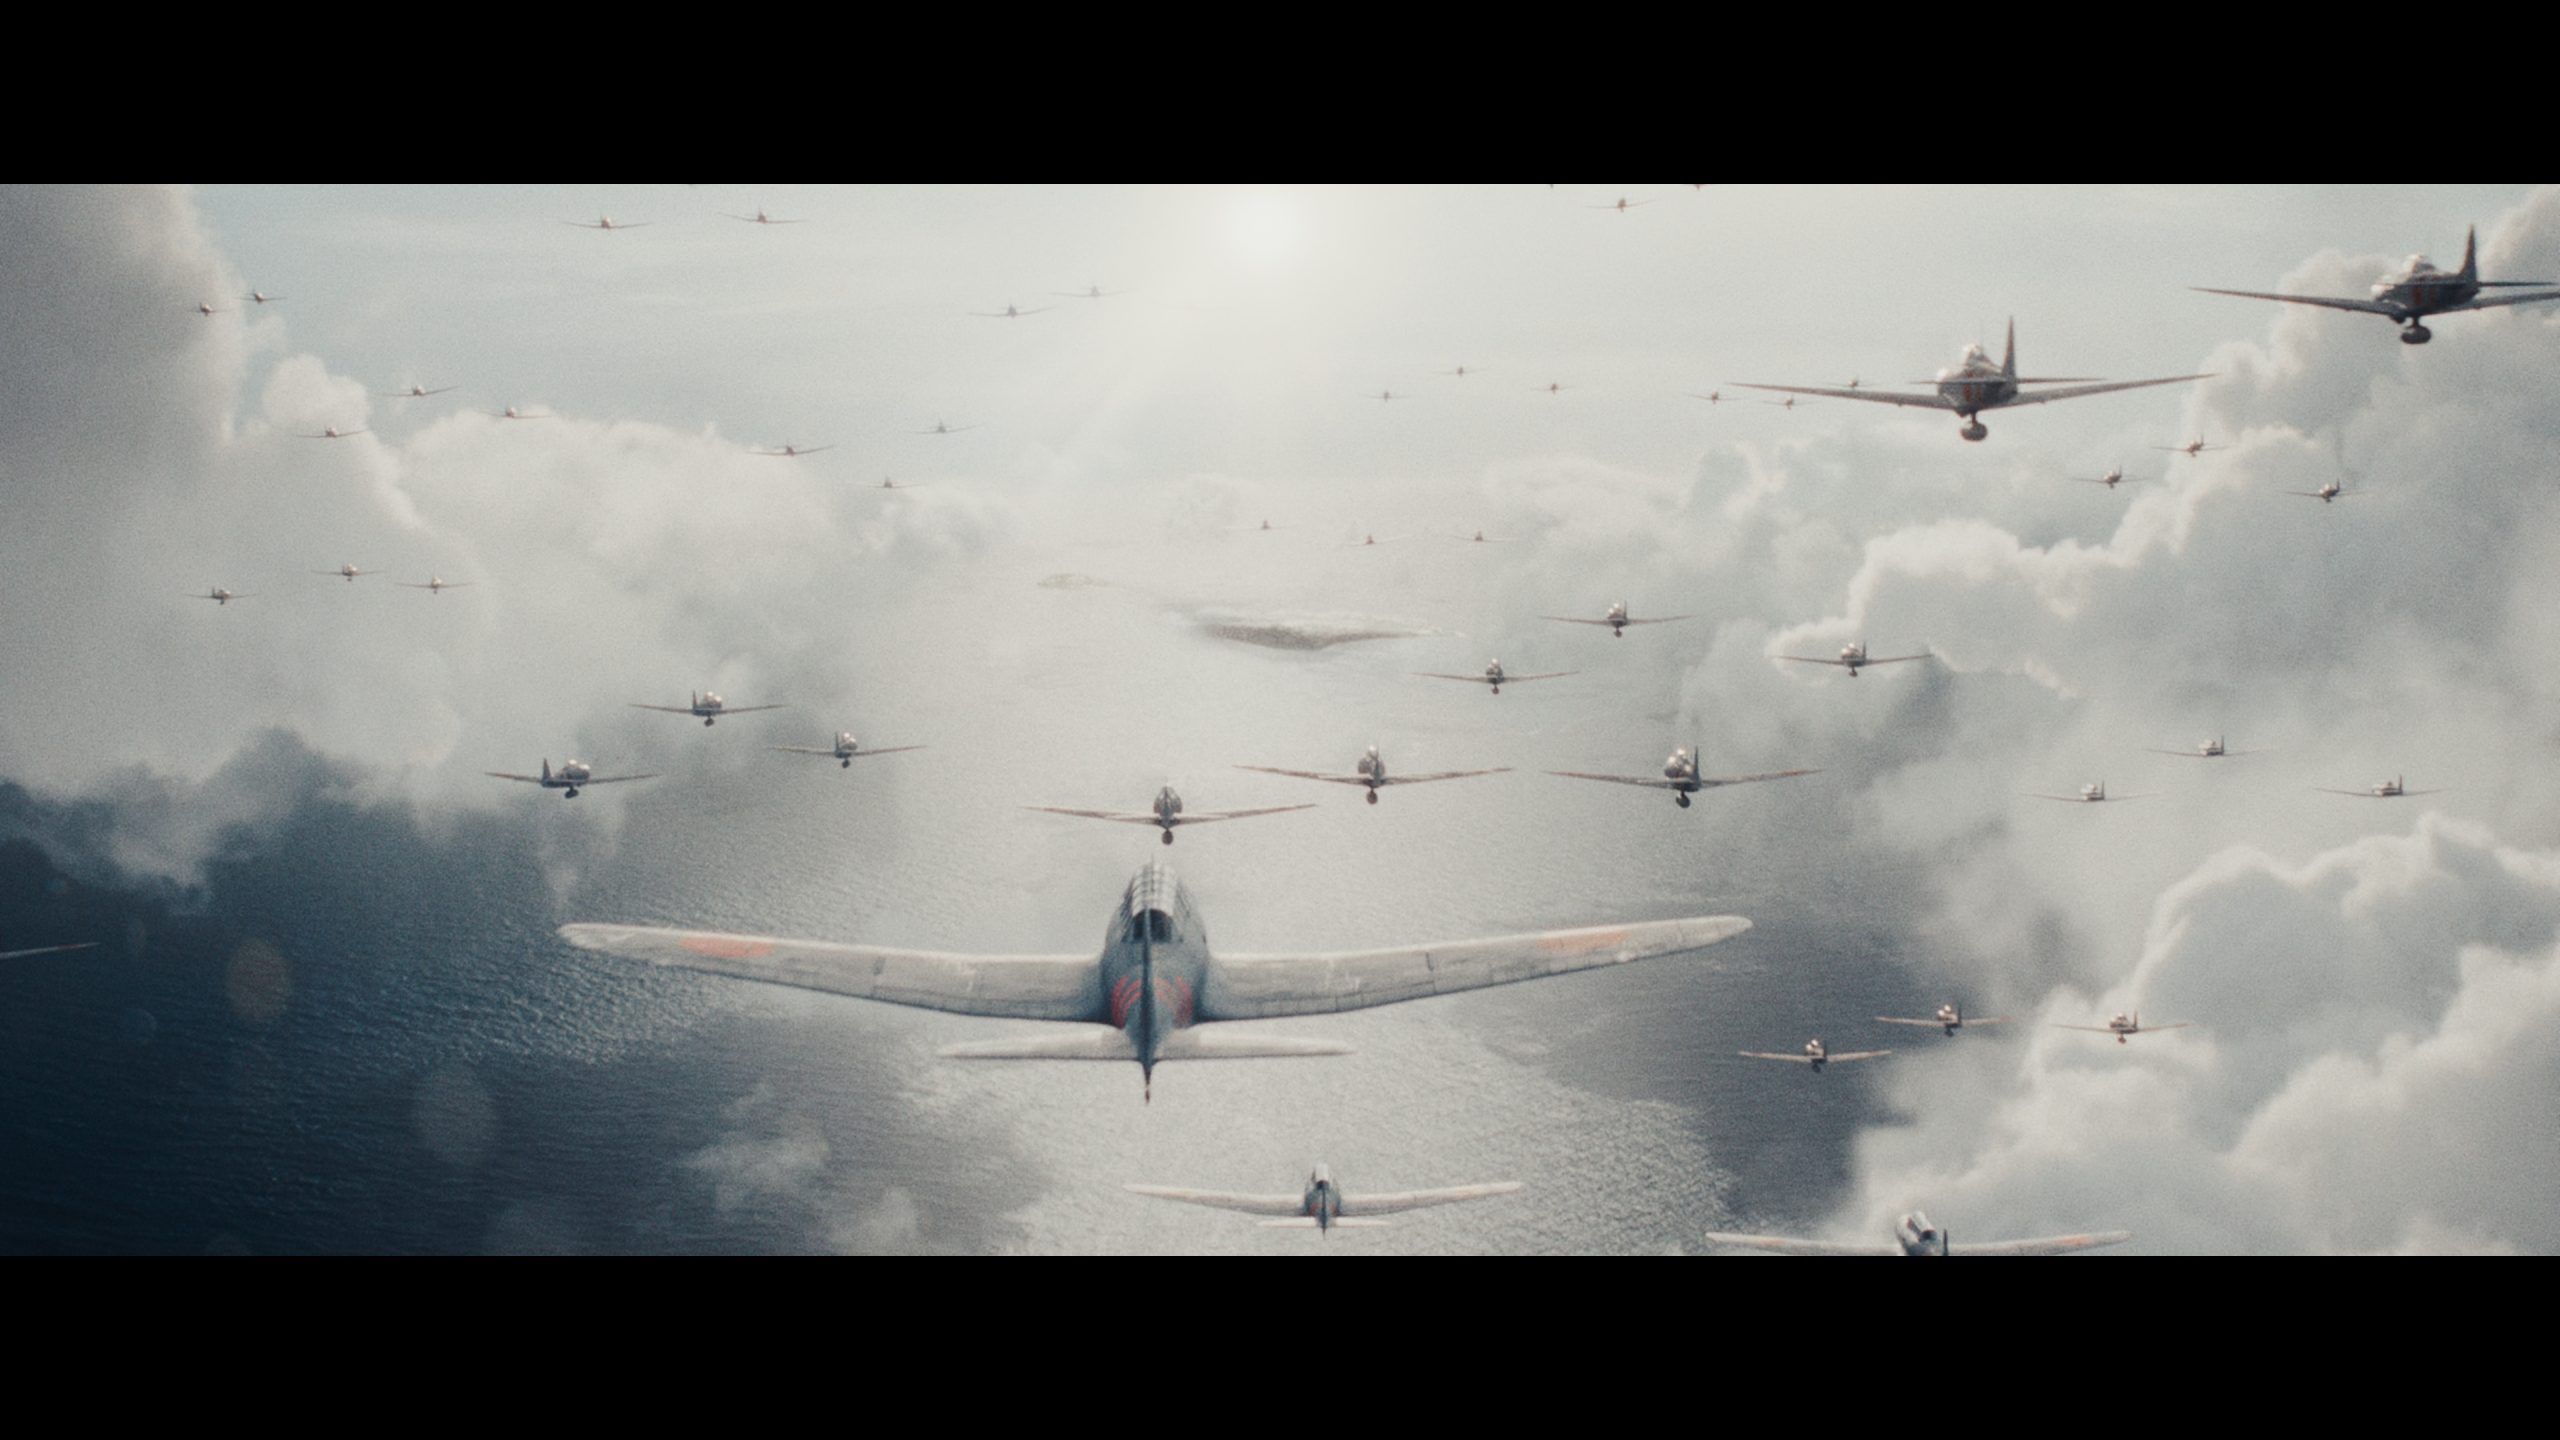 Midway (2019) Wallpapers